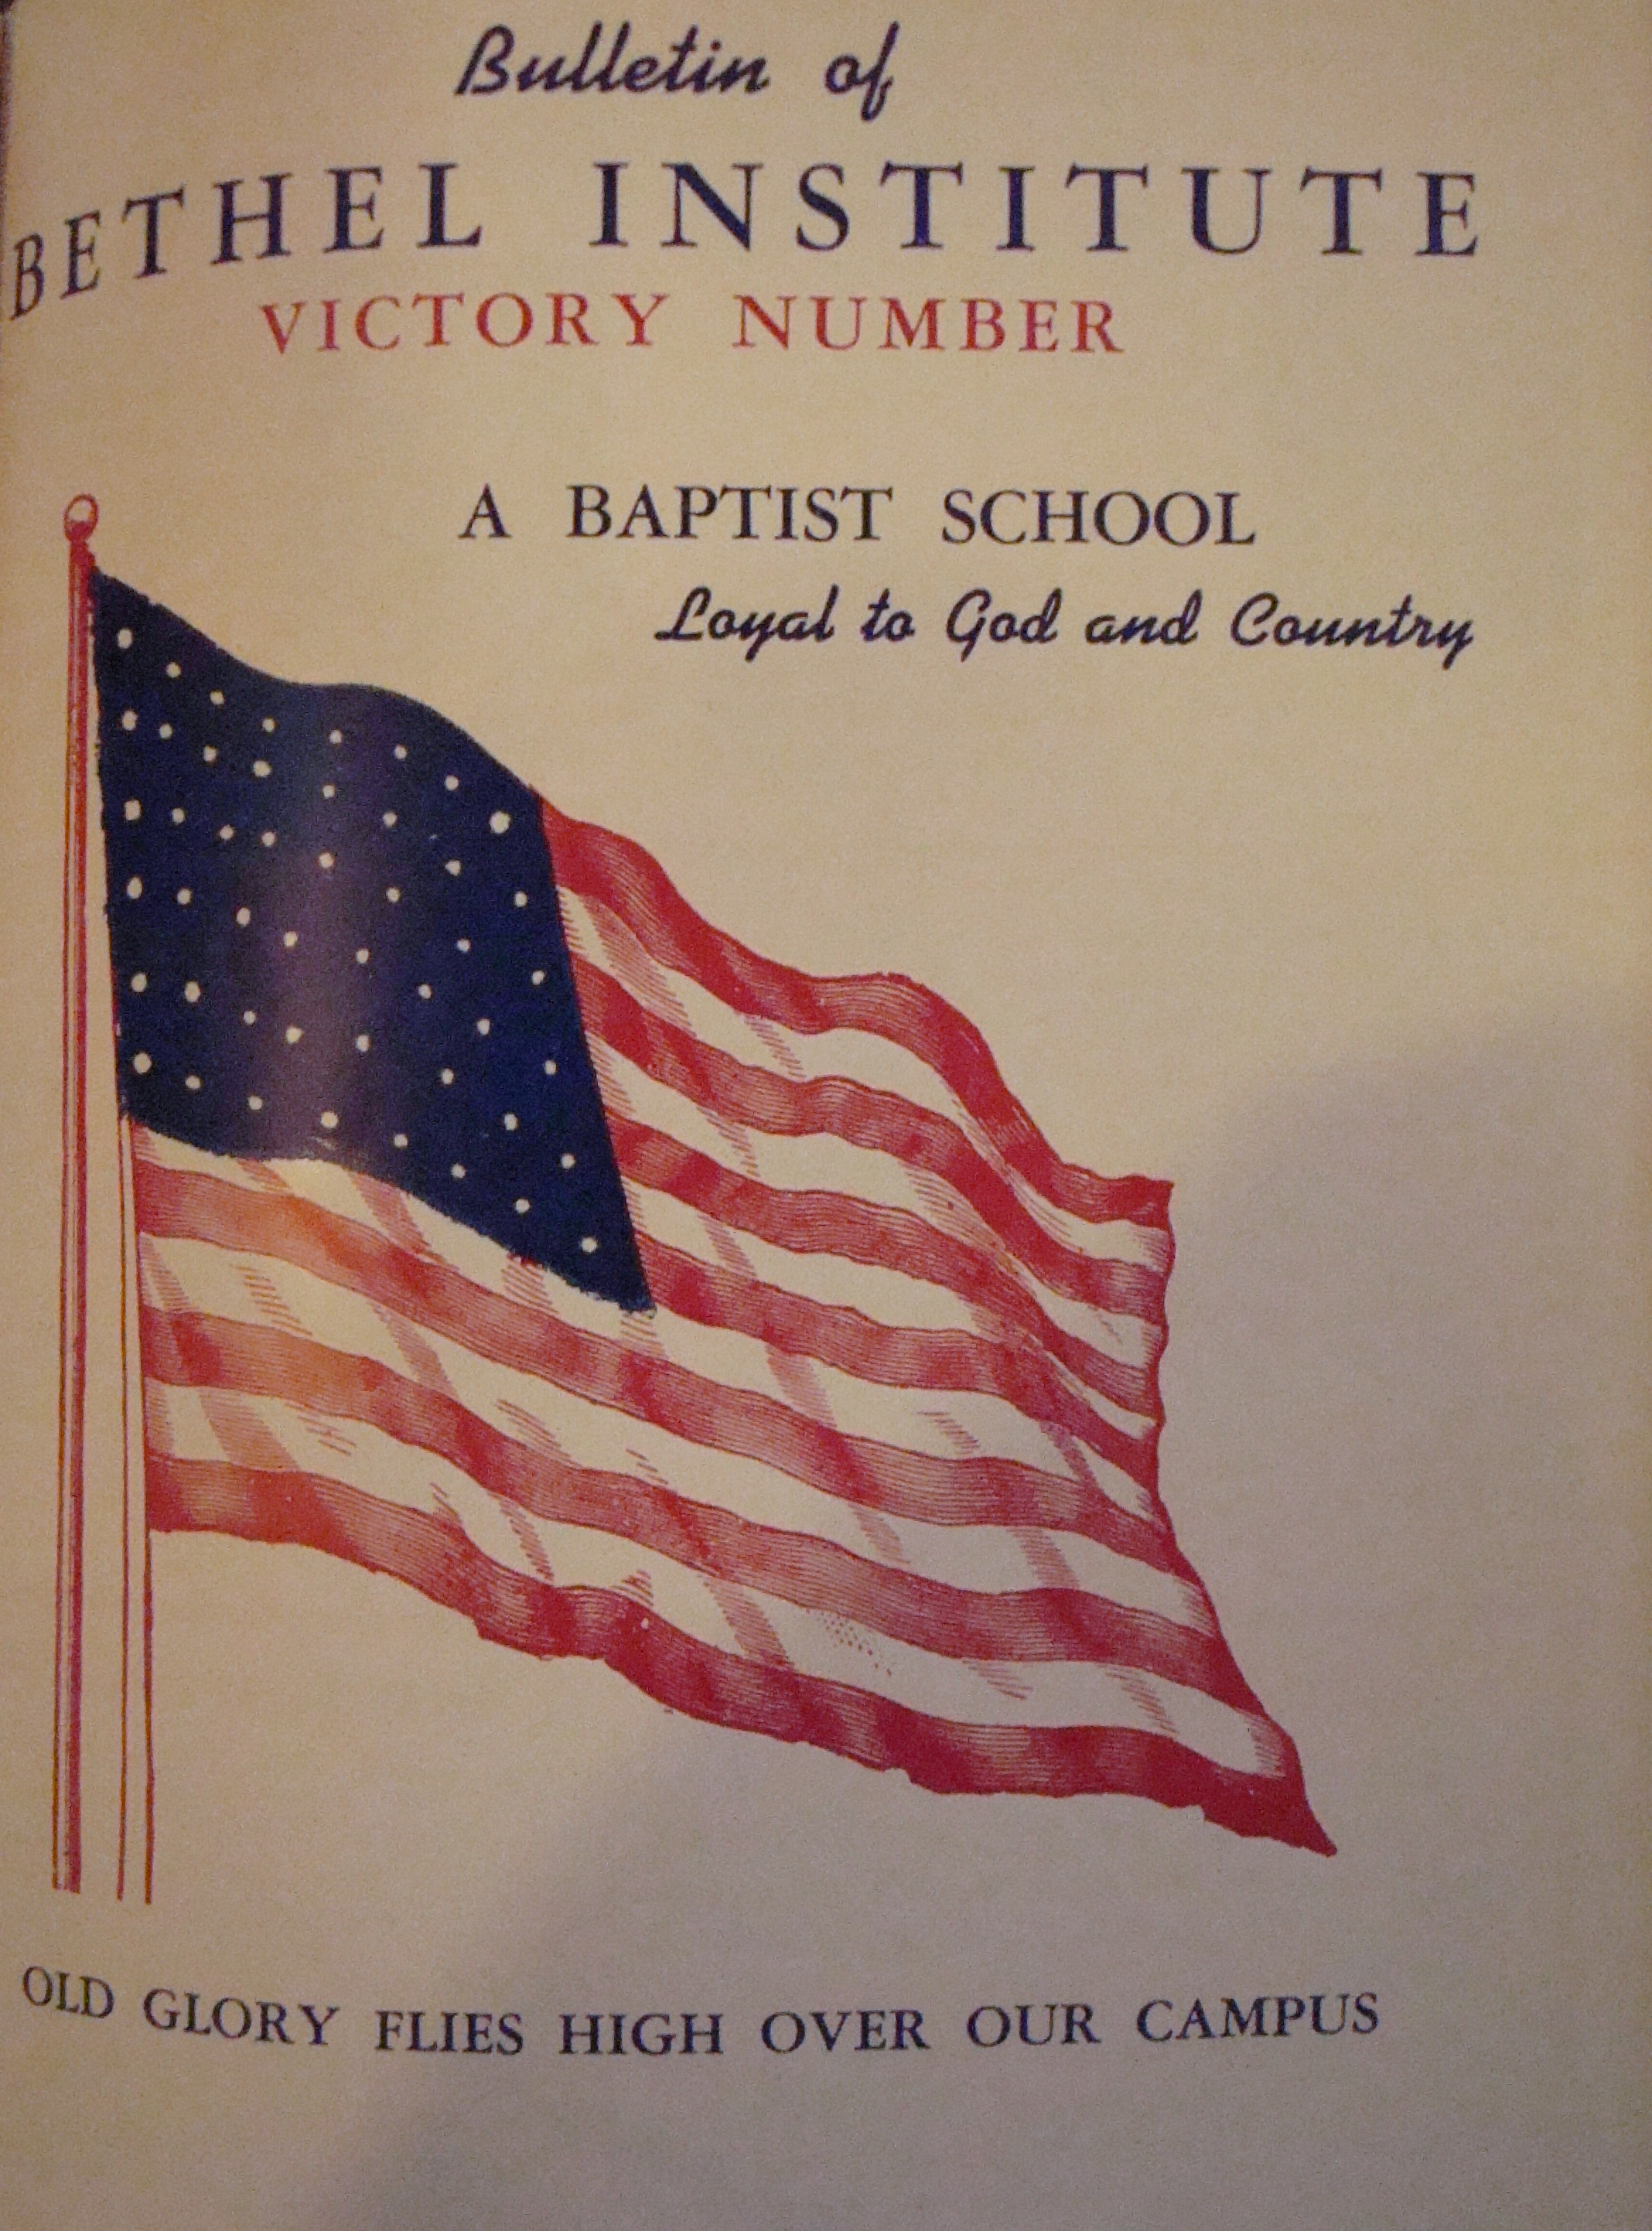 Cover of the July 1942 Bethel Bulletin: a "Victory Number"